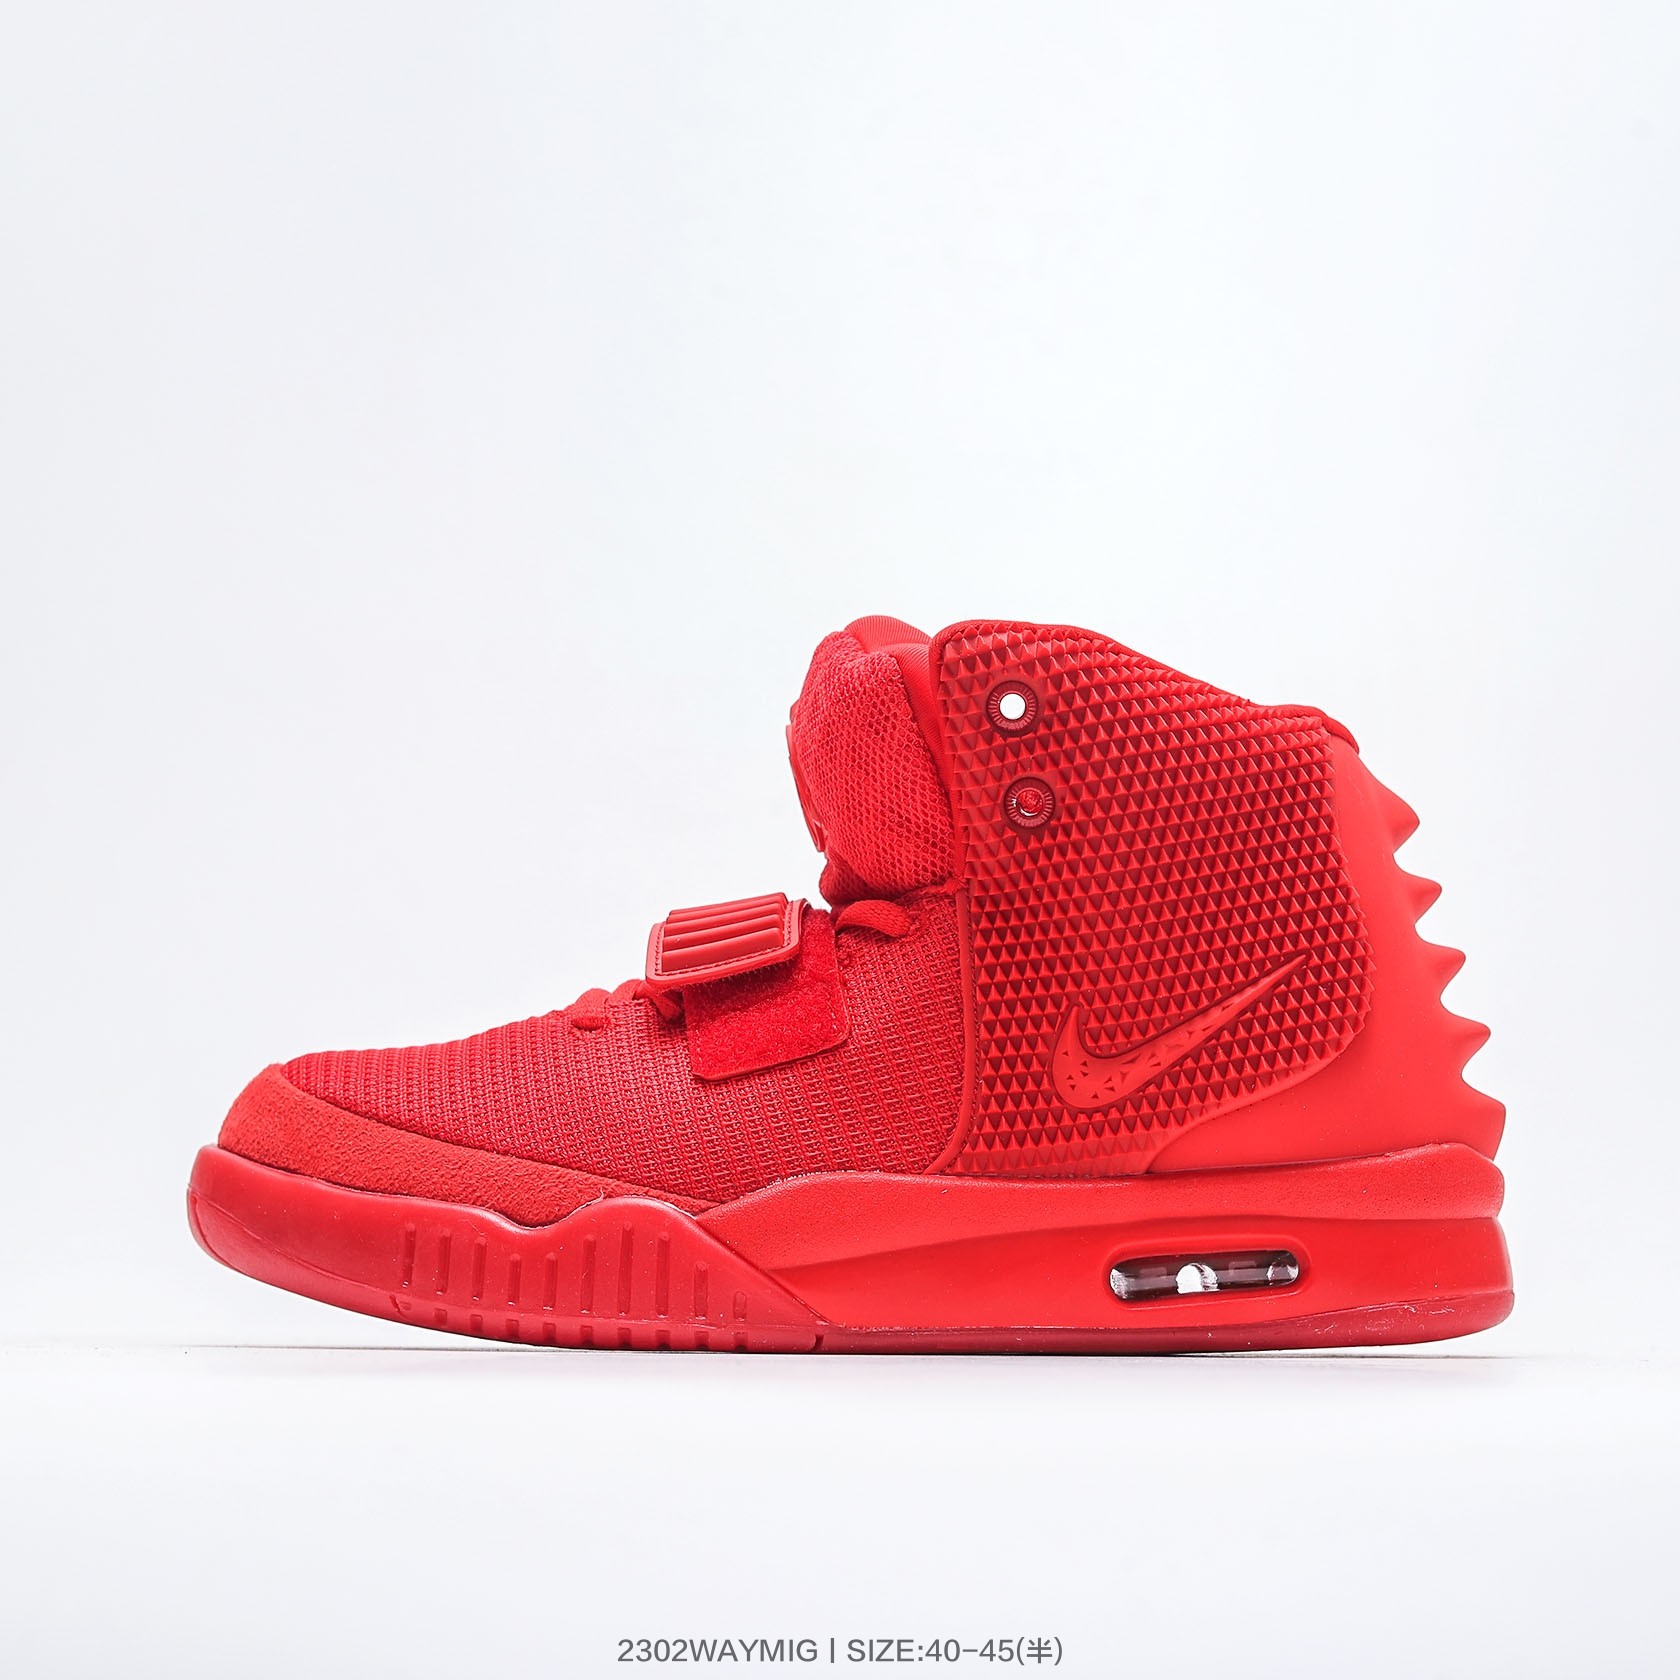 NIKE AIR YEEZY 2 USED SIZE 10 RED OCTOBER 508214 660 KANYE WEST